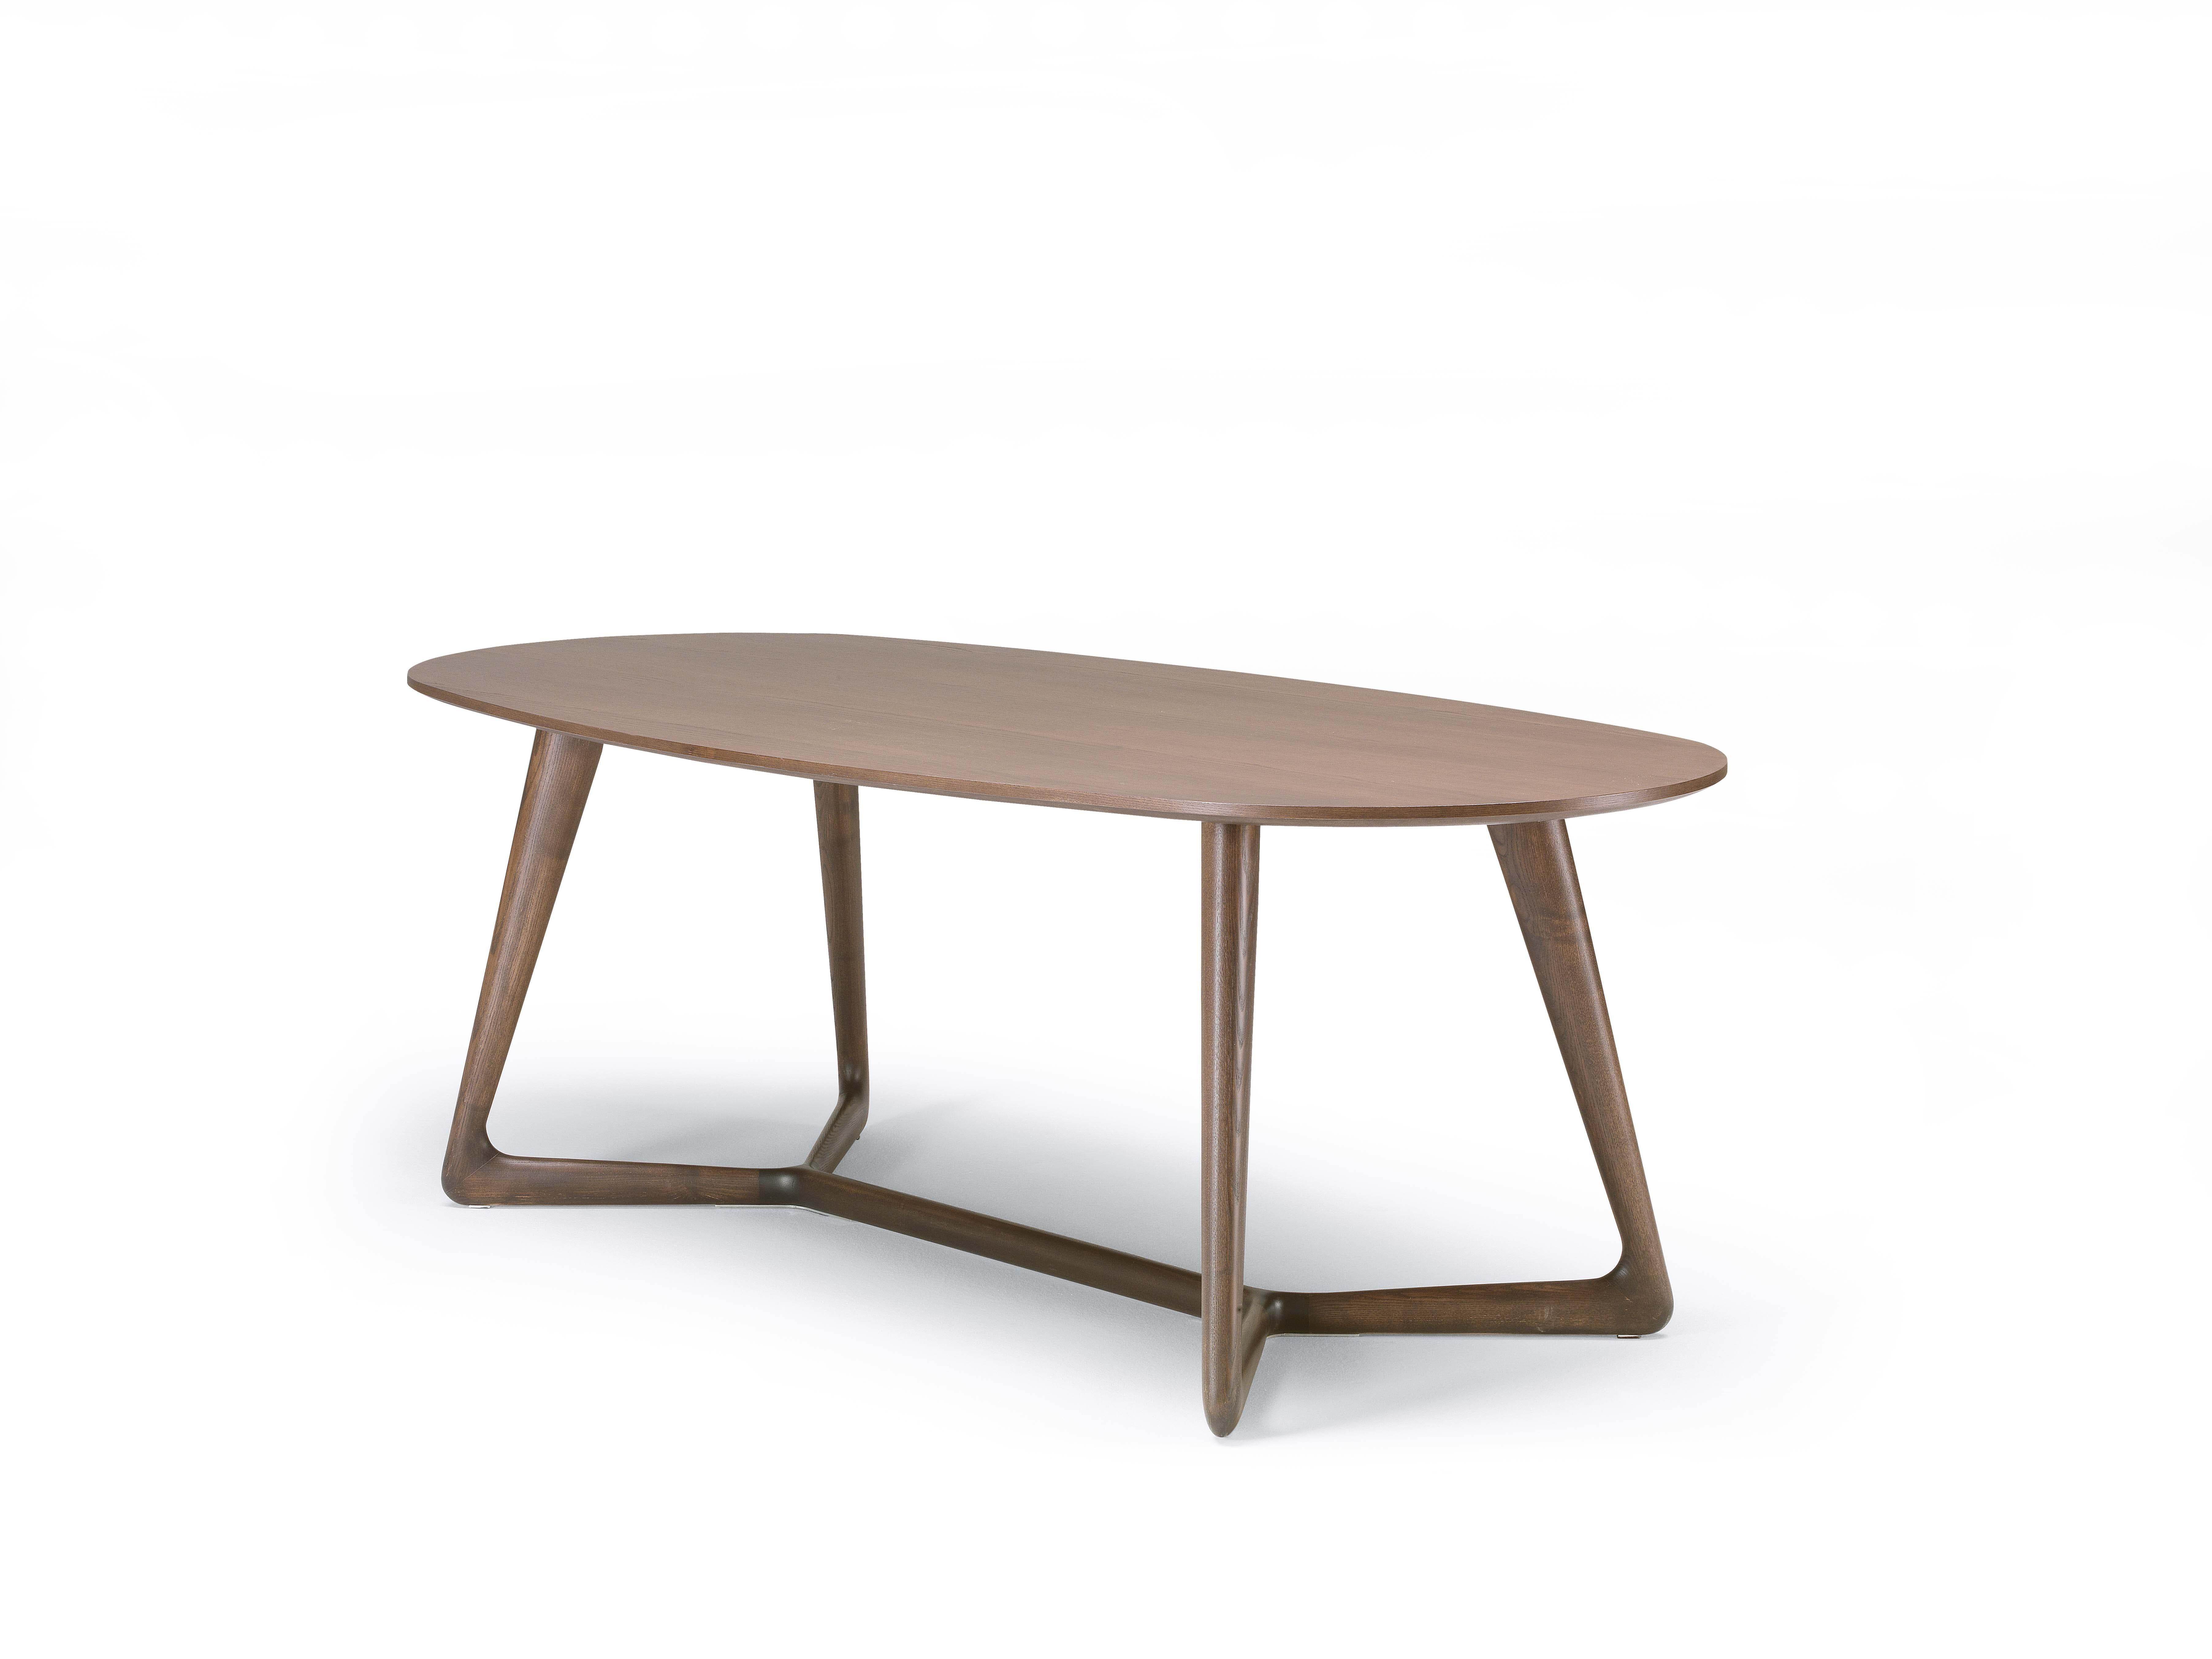 Oval dining table with structure in solid ash and top veneered ash. Details in polished aluminium. Available finishings: FN natural ash, WG wengé, NC walnut, TB tobacco, open pore matte lacquered (L21 white, L29 pearl, L23 cappuccino color, L25